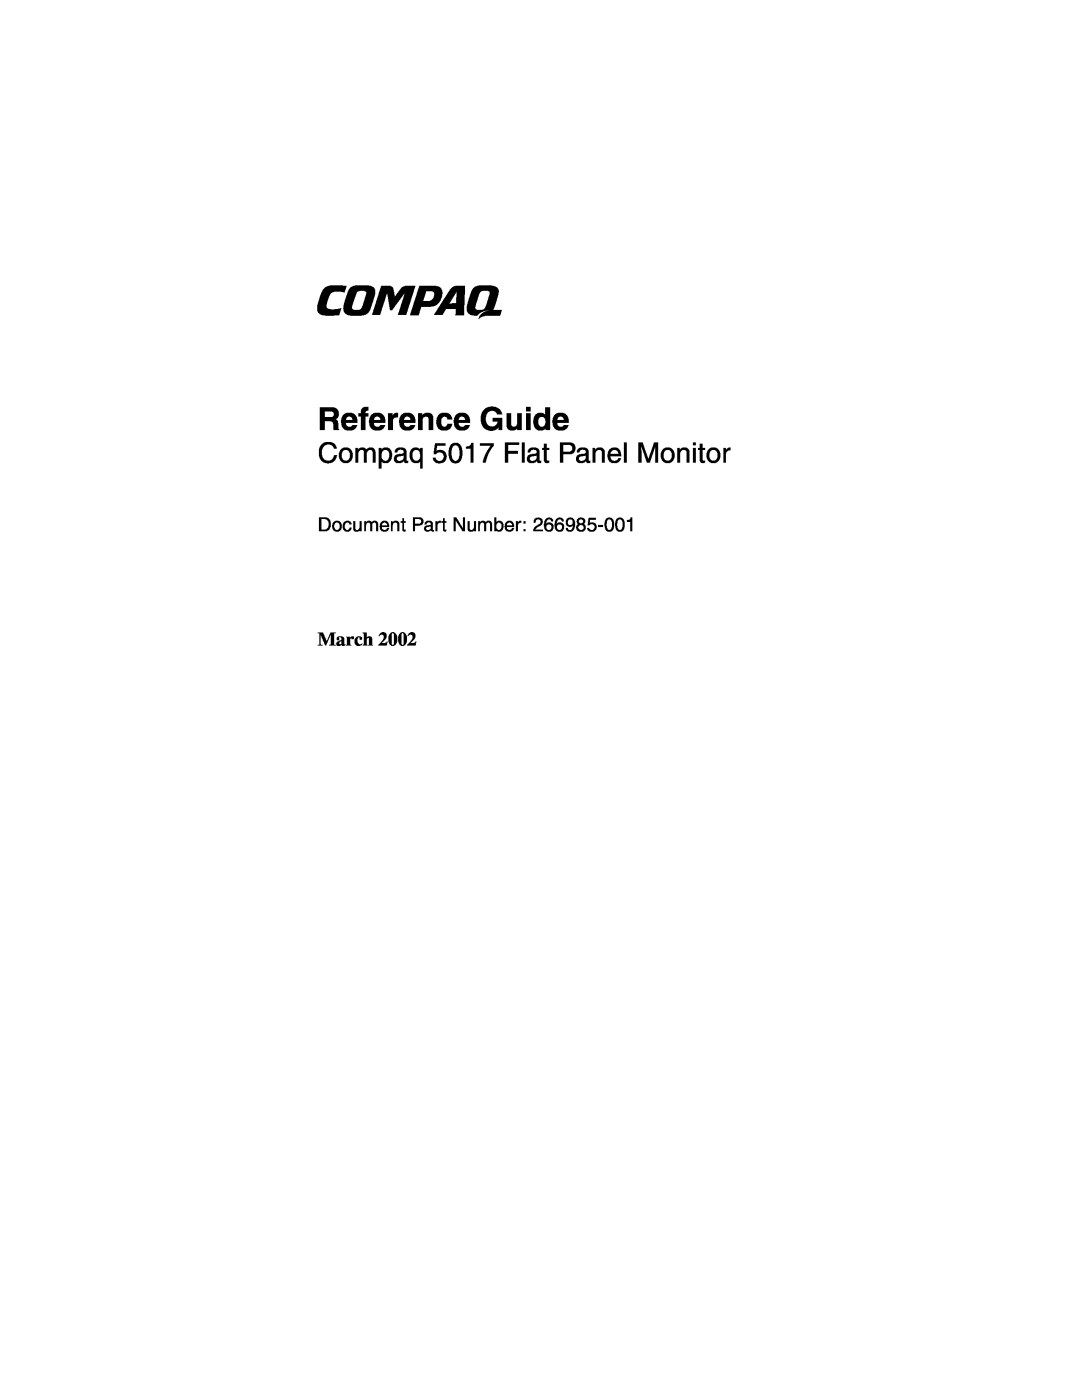 Compaq manual March, Reference Guide, Compaq 5017 Flat Panel Monitor, Document Part Number 